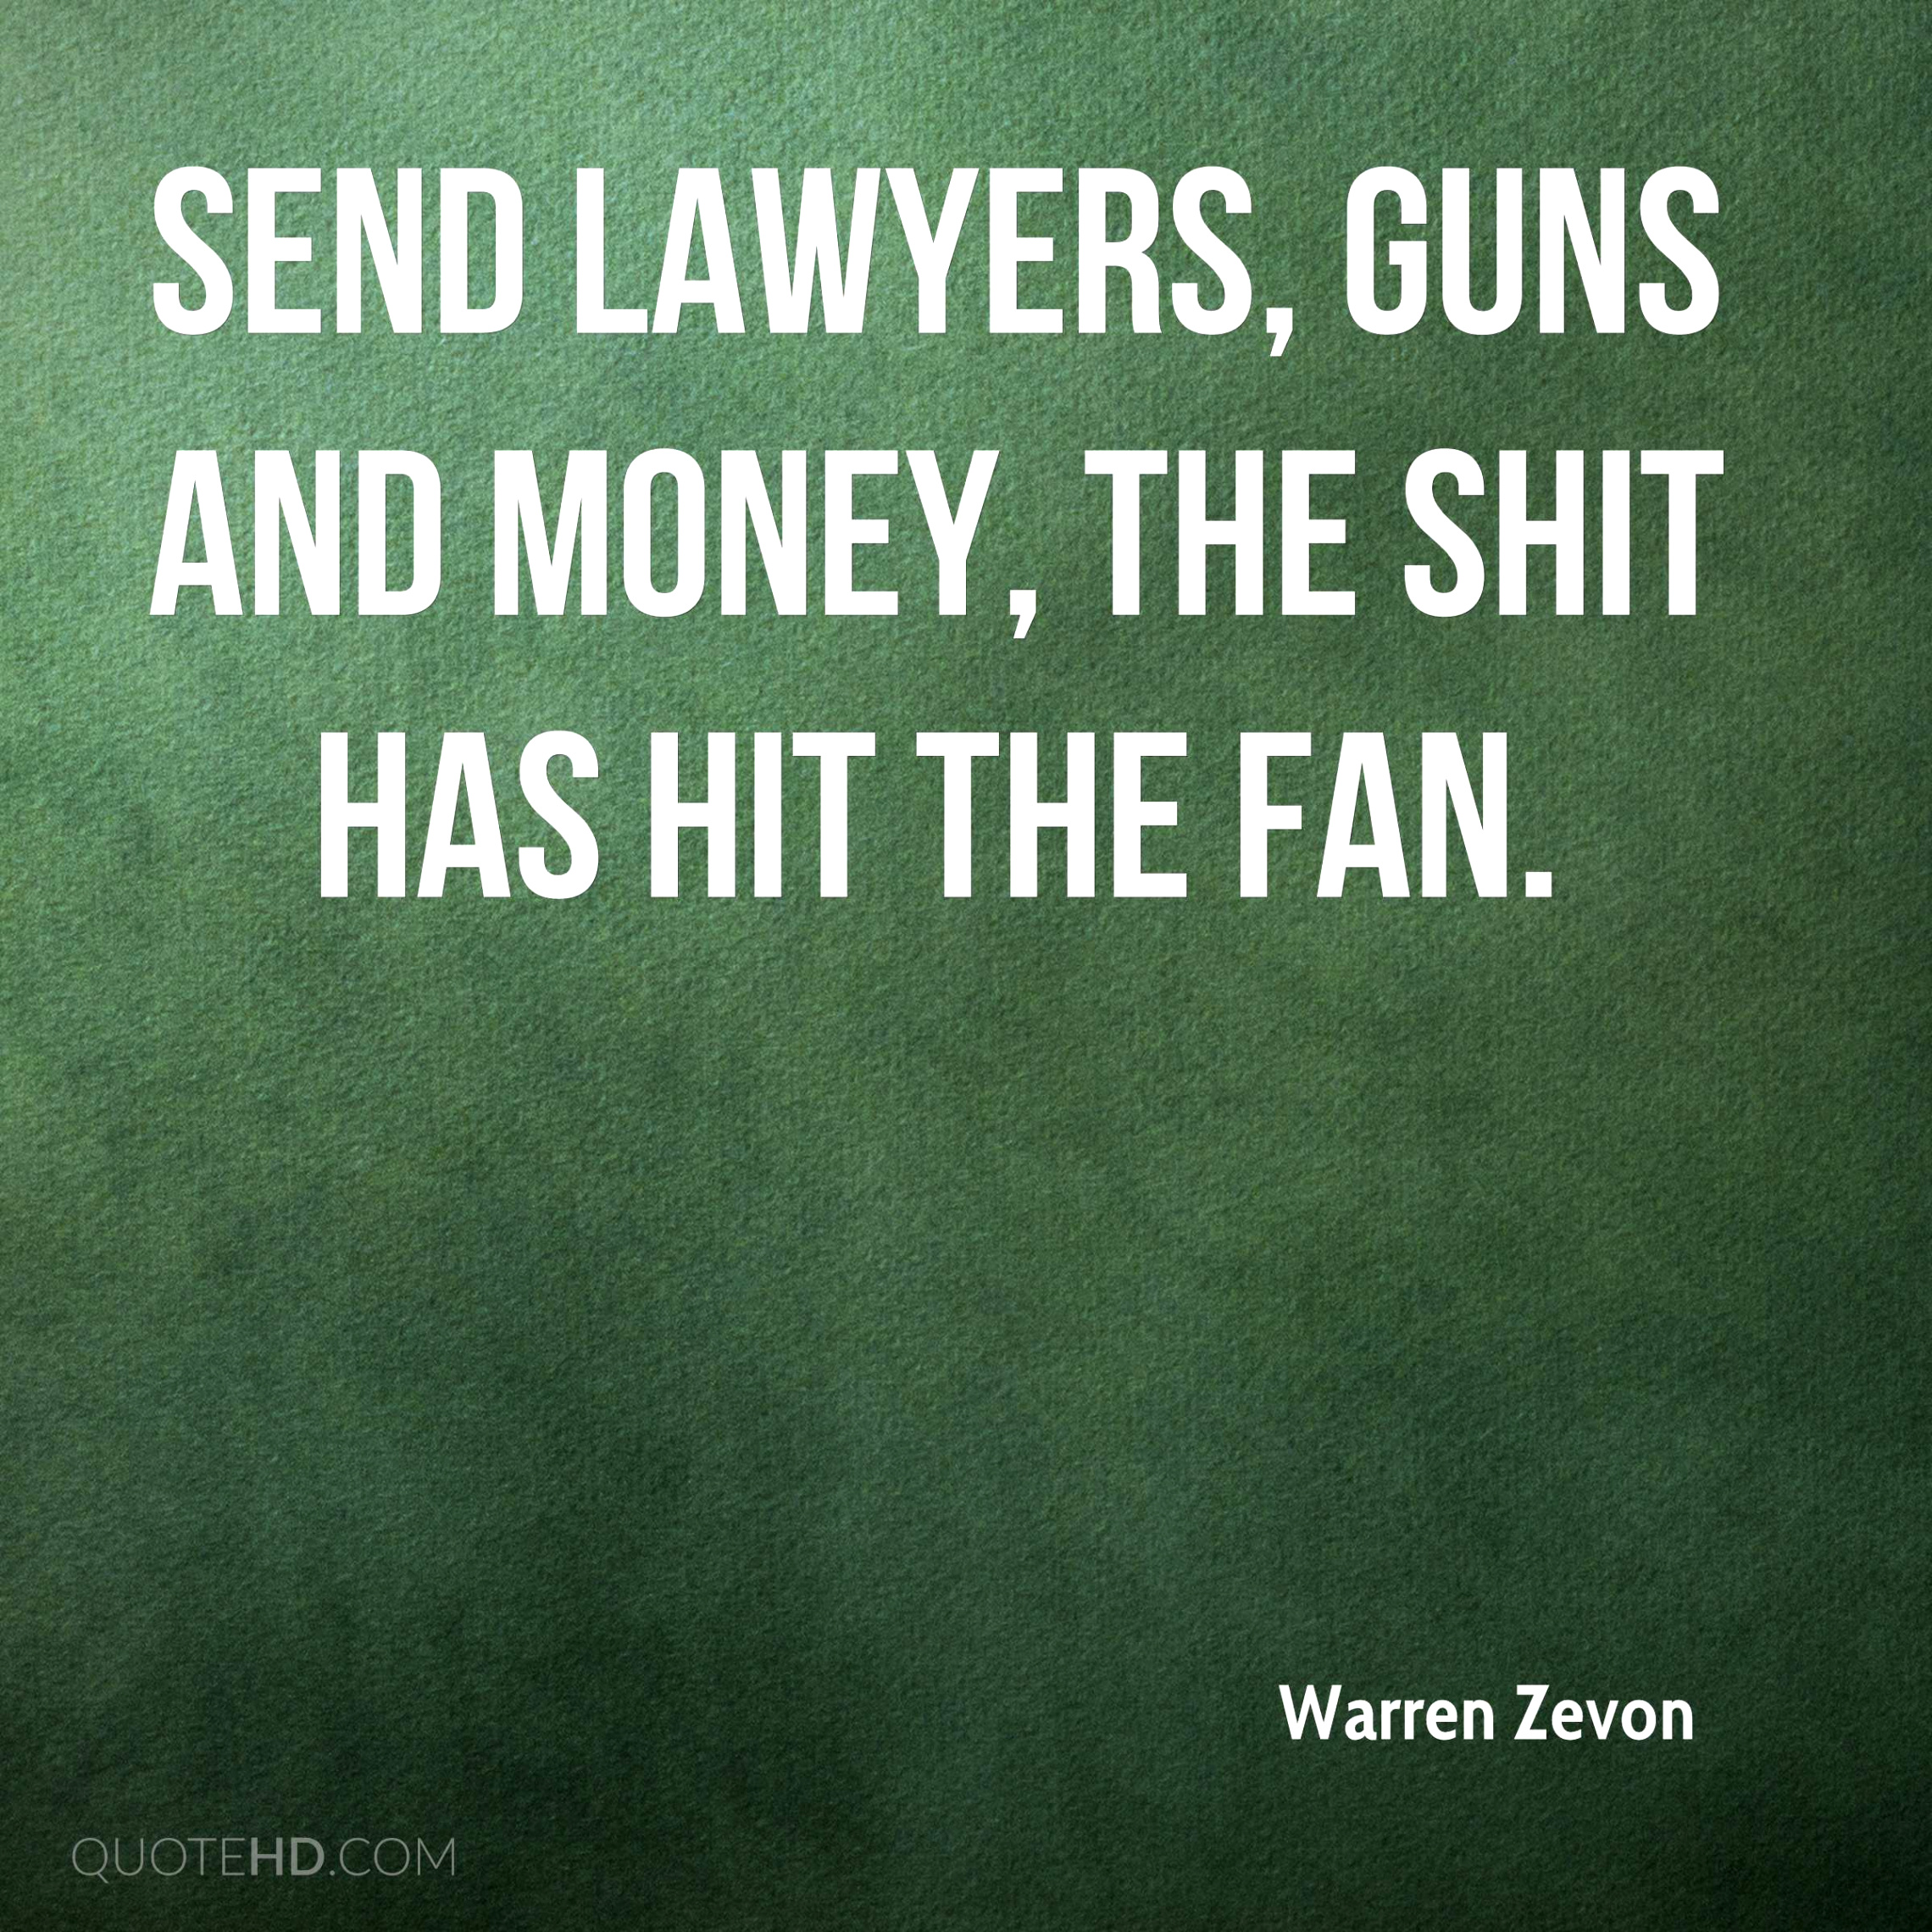 warren zevon quote send lawyers guns and money the shit has hit the fa